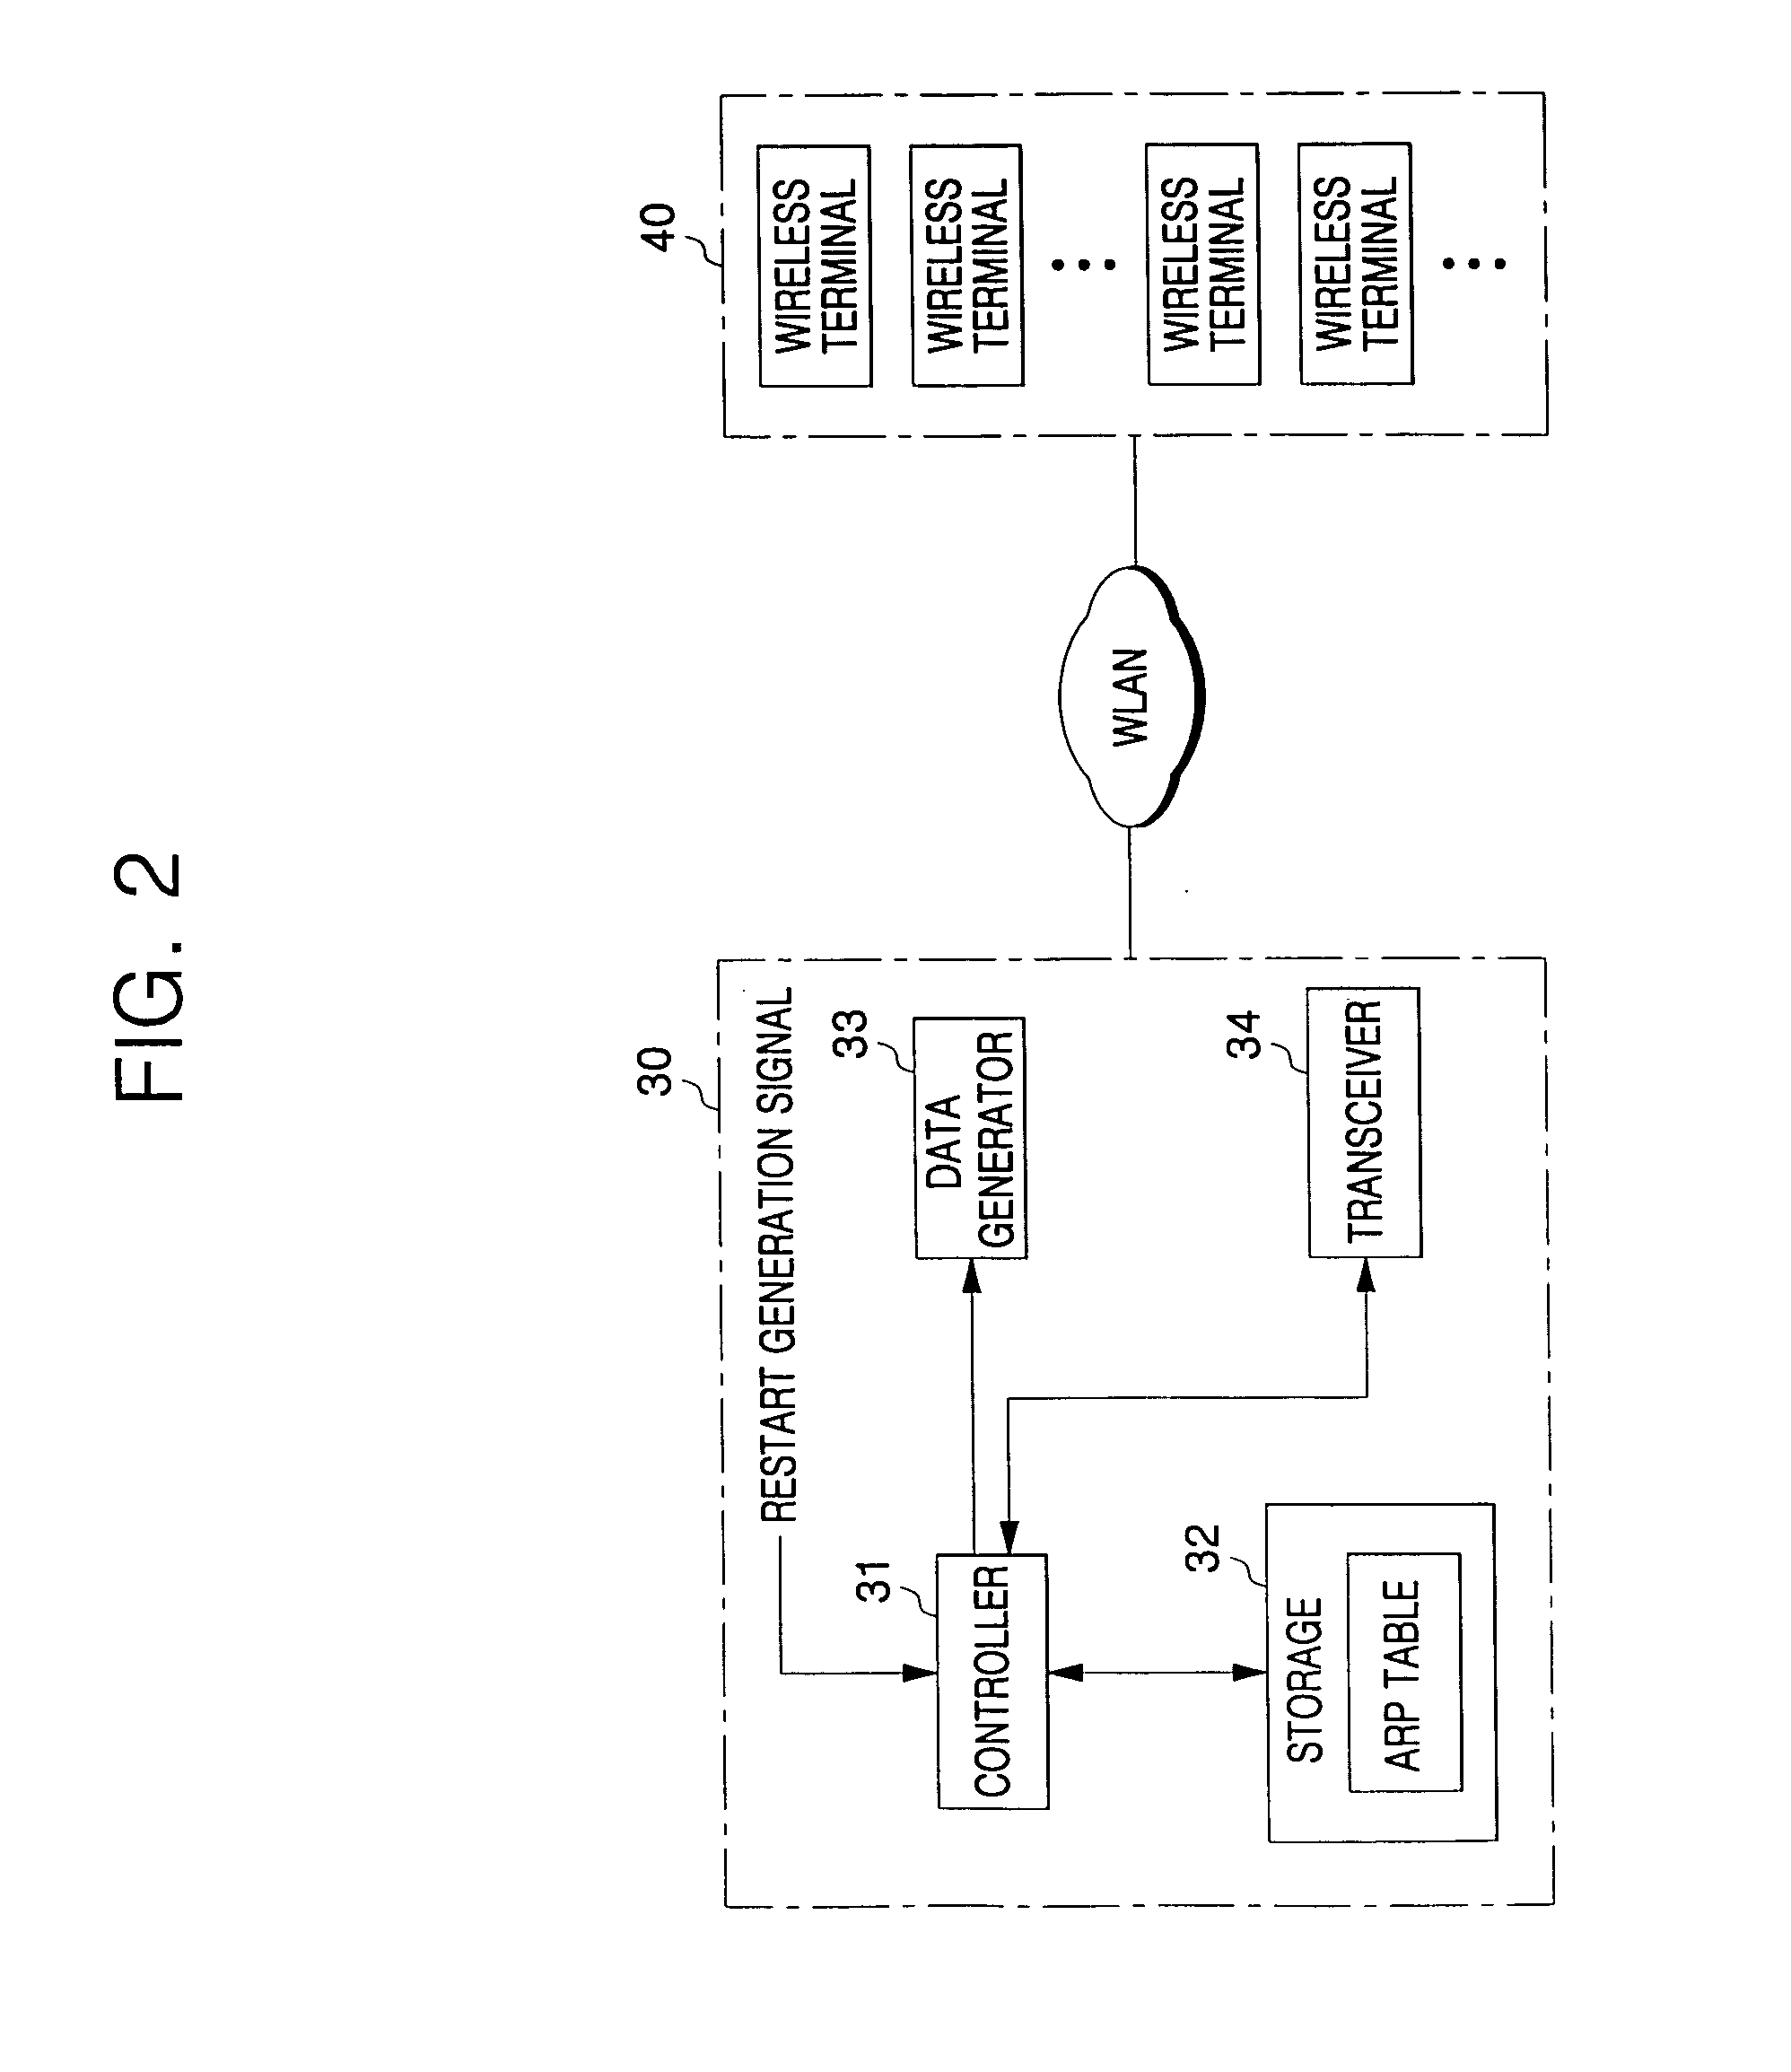 Apparatus and method for registering wireless terminals with access point through wireless network